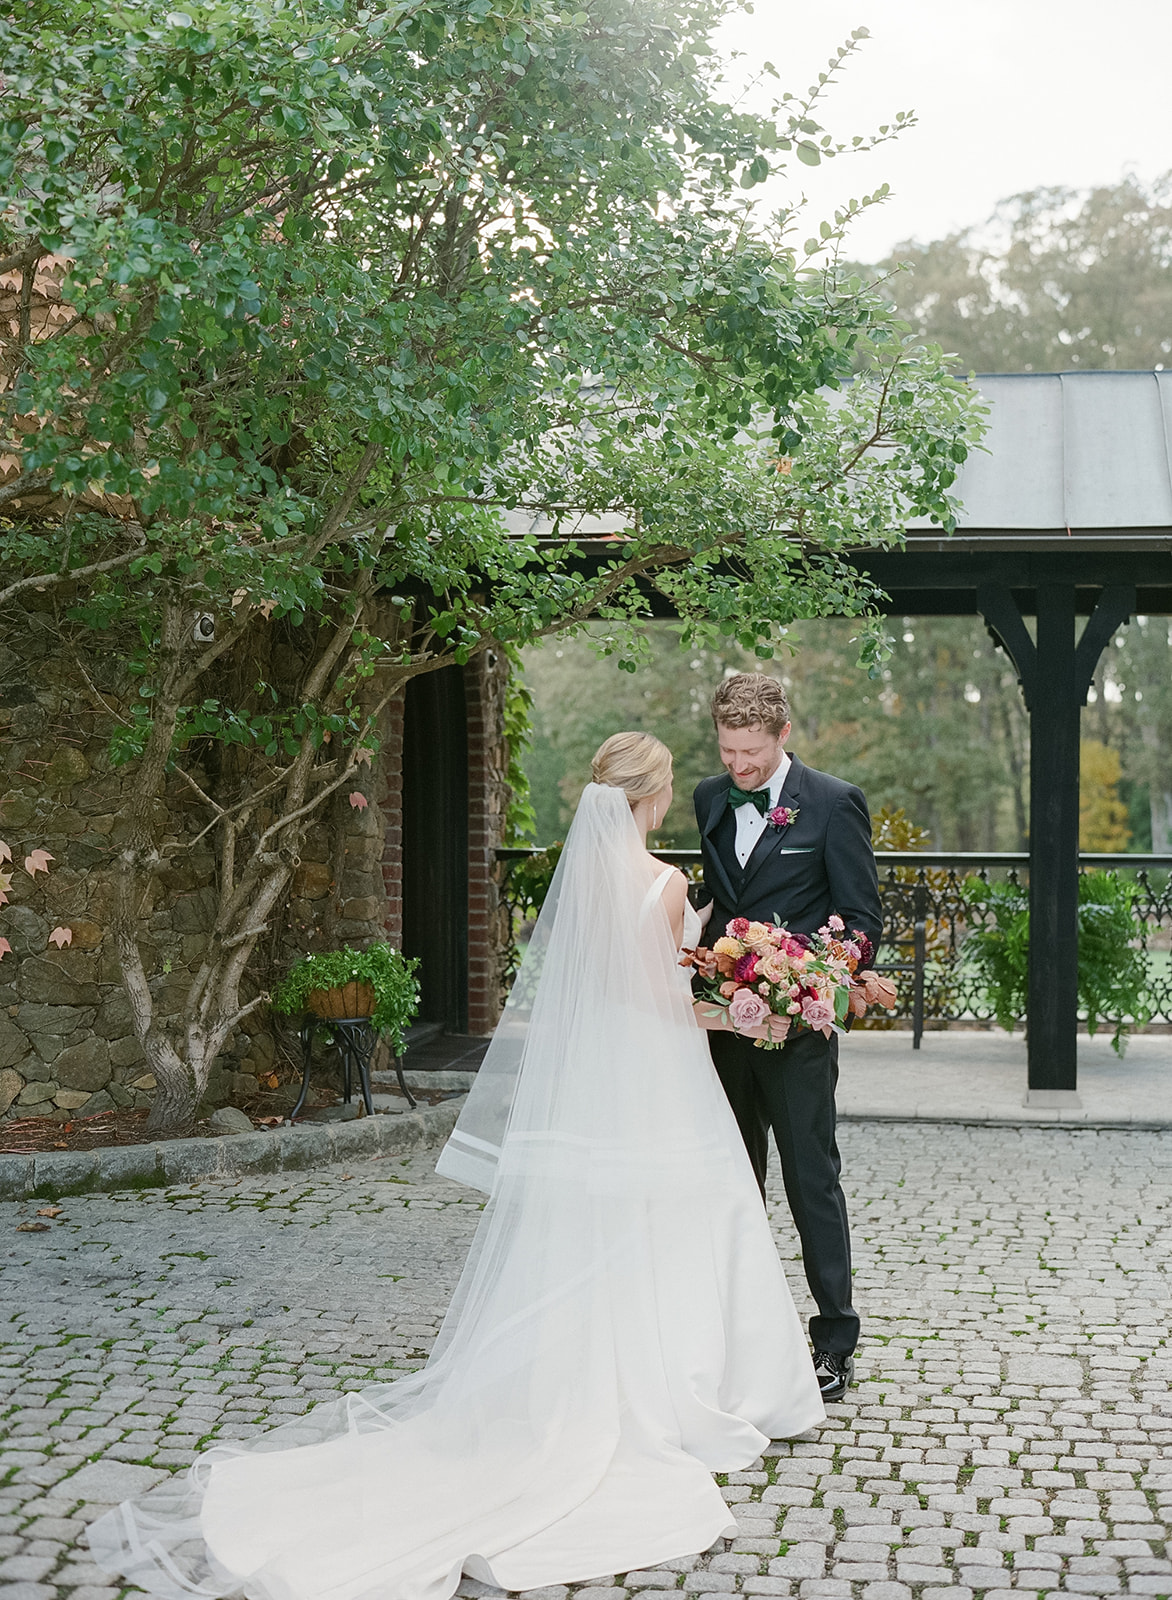 Bride and Groom in courtyard